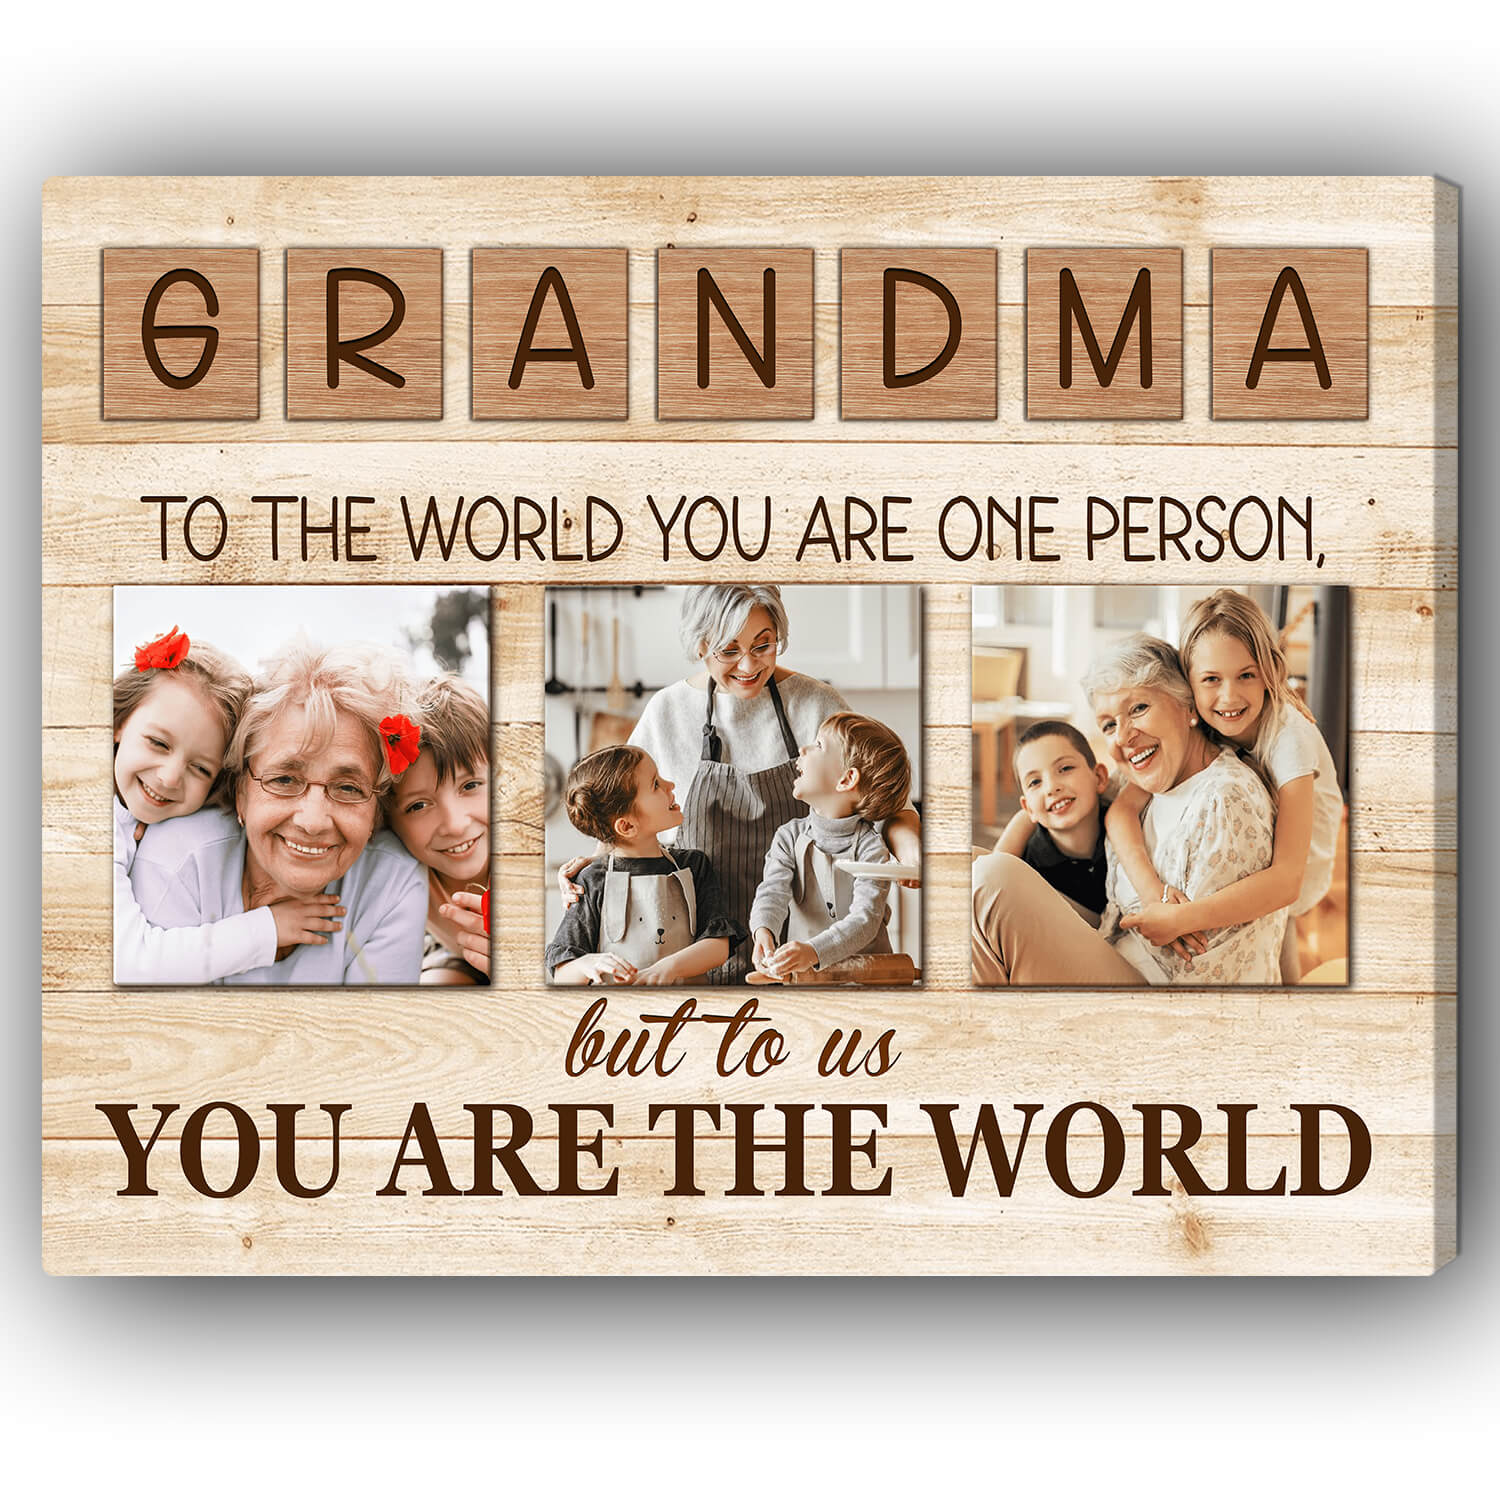 Grandma to the world - Personalized Mother's Day or Birthday gift for Grandma - Custom Canvas Print - MyMindfulGifts